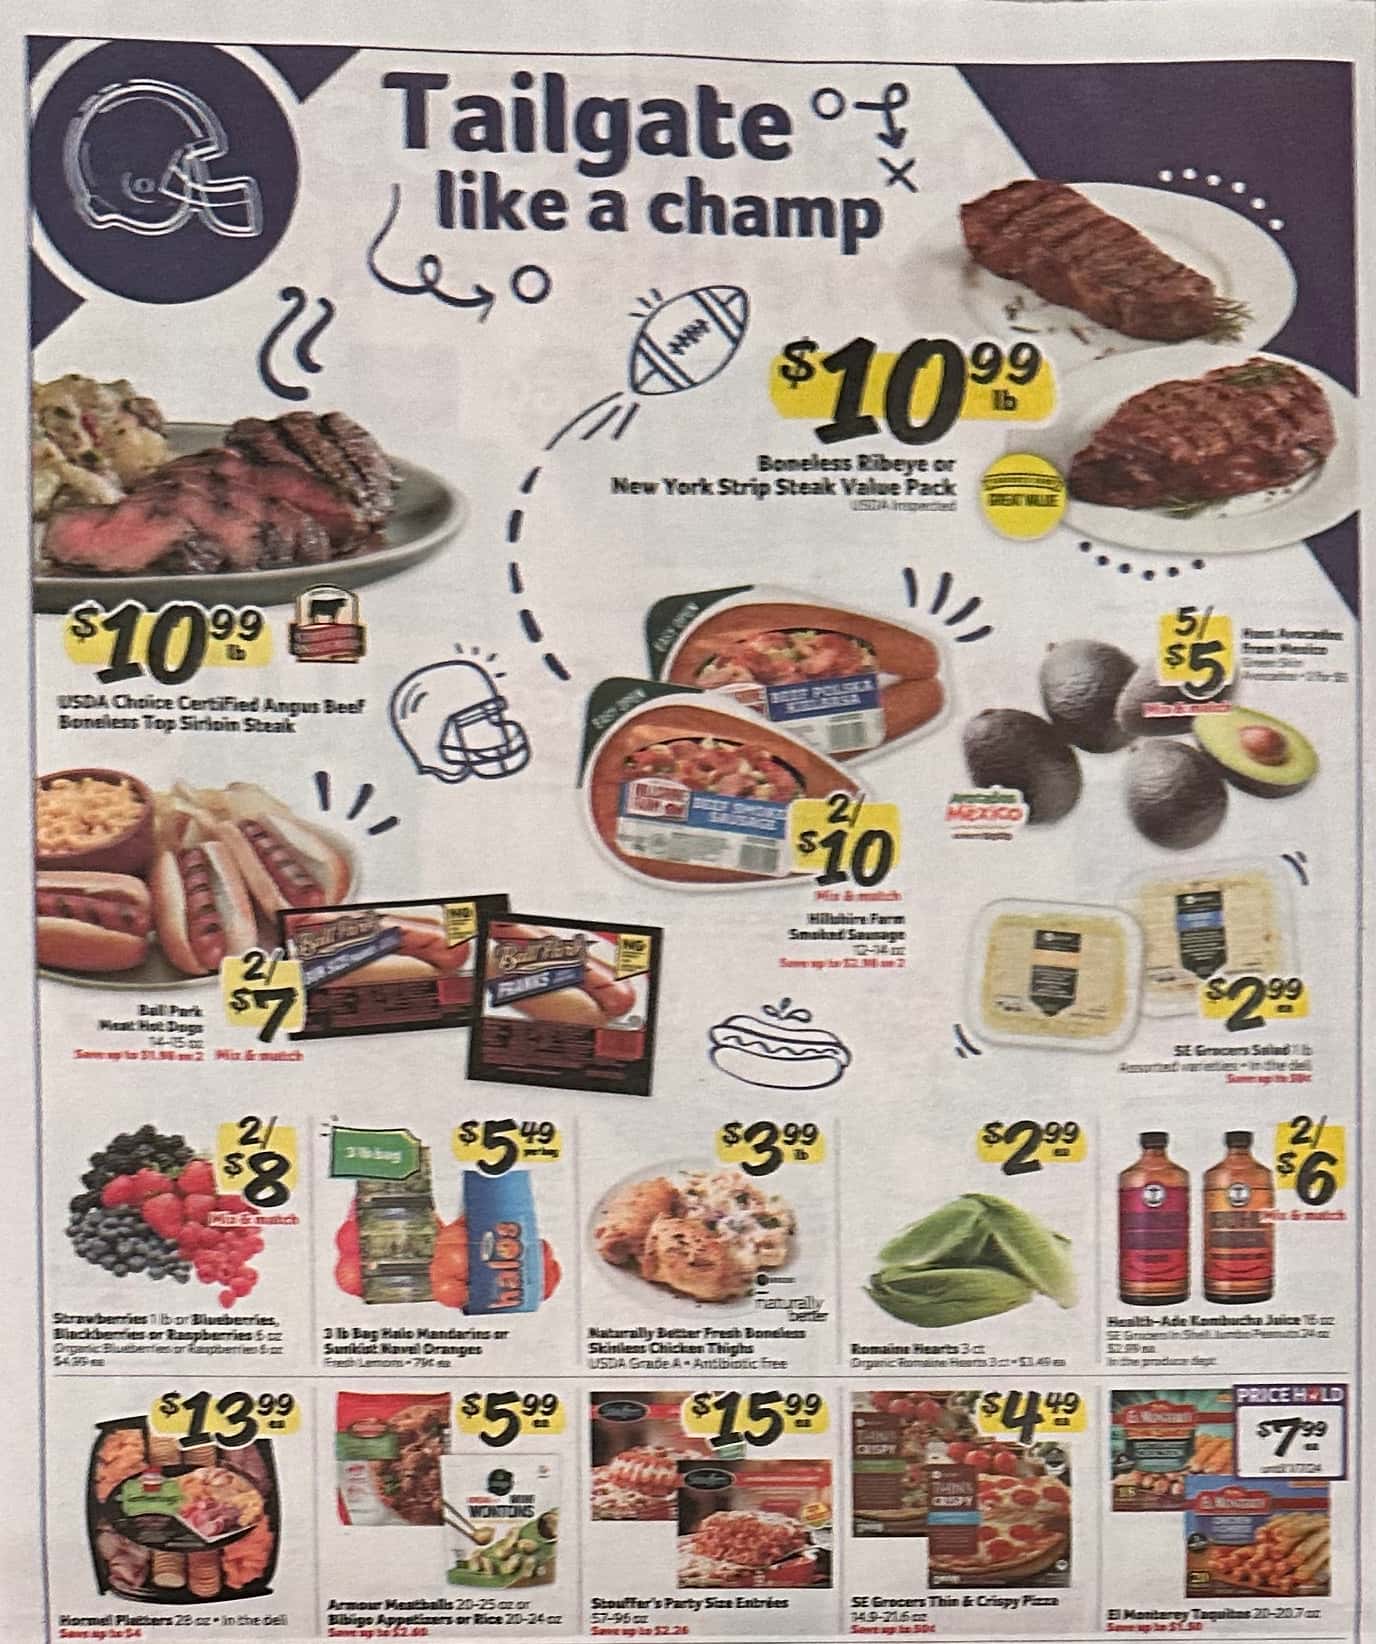 Winn Dixie Black Friday July 2024 Weekly Sales, Deals, Discounts and Digital Coupons.